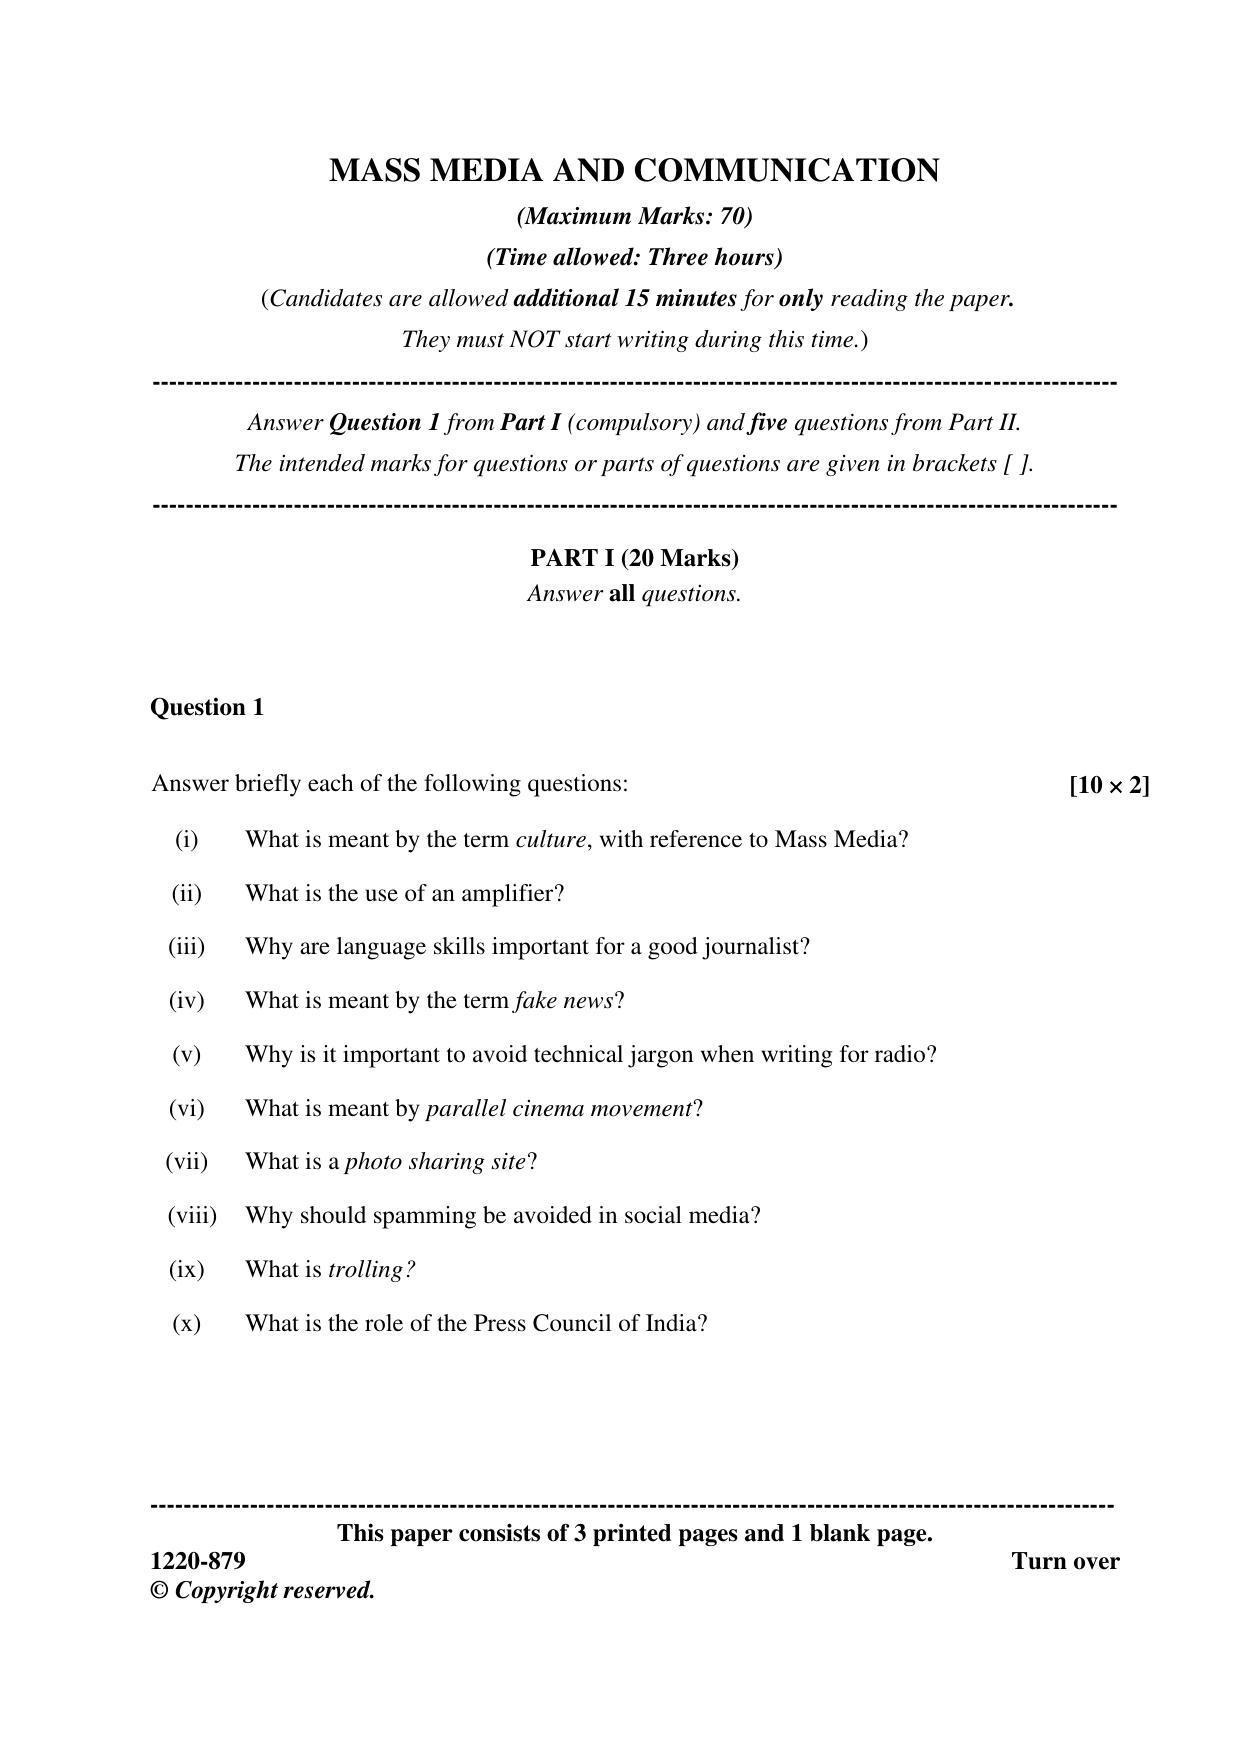 ISC Class 12 2020 Mass Media & Communication Question Paper - Page 1